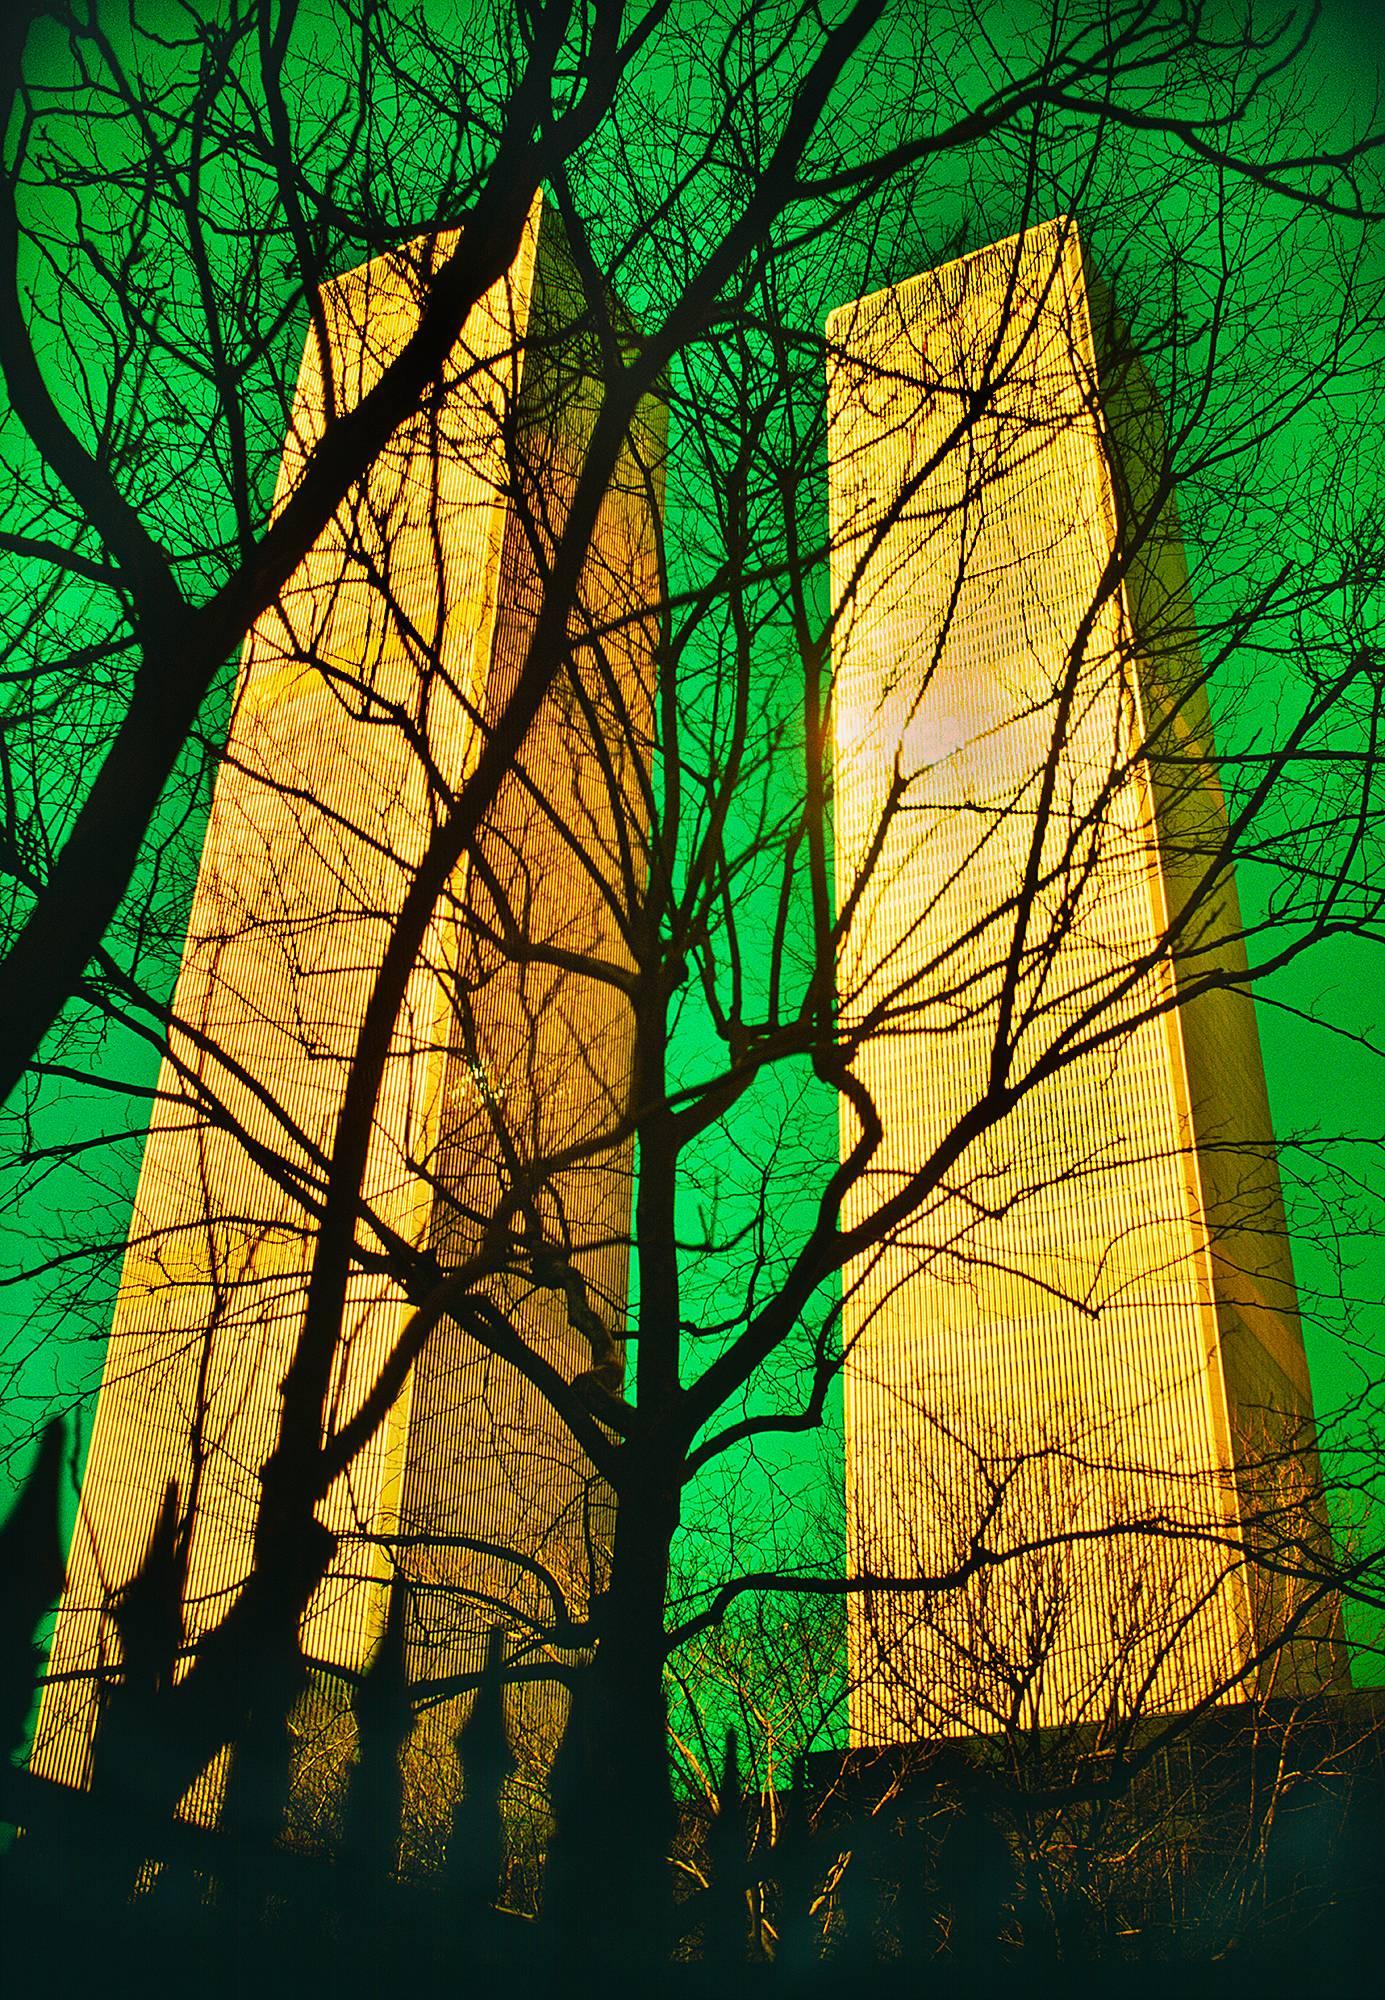 Mitchell Funk Color Photograph - Twin Towers, World Trade Center with Green Filter